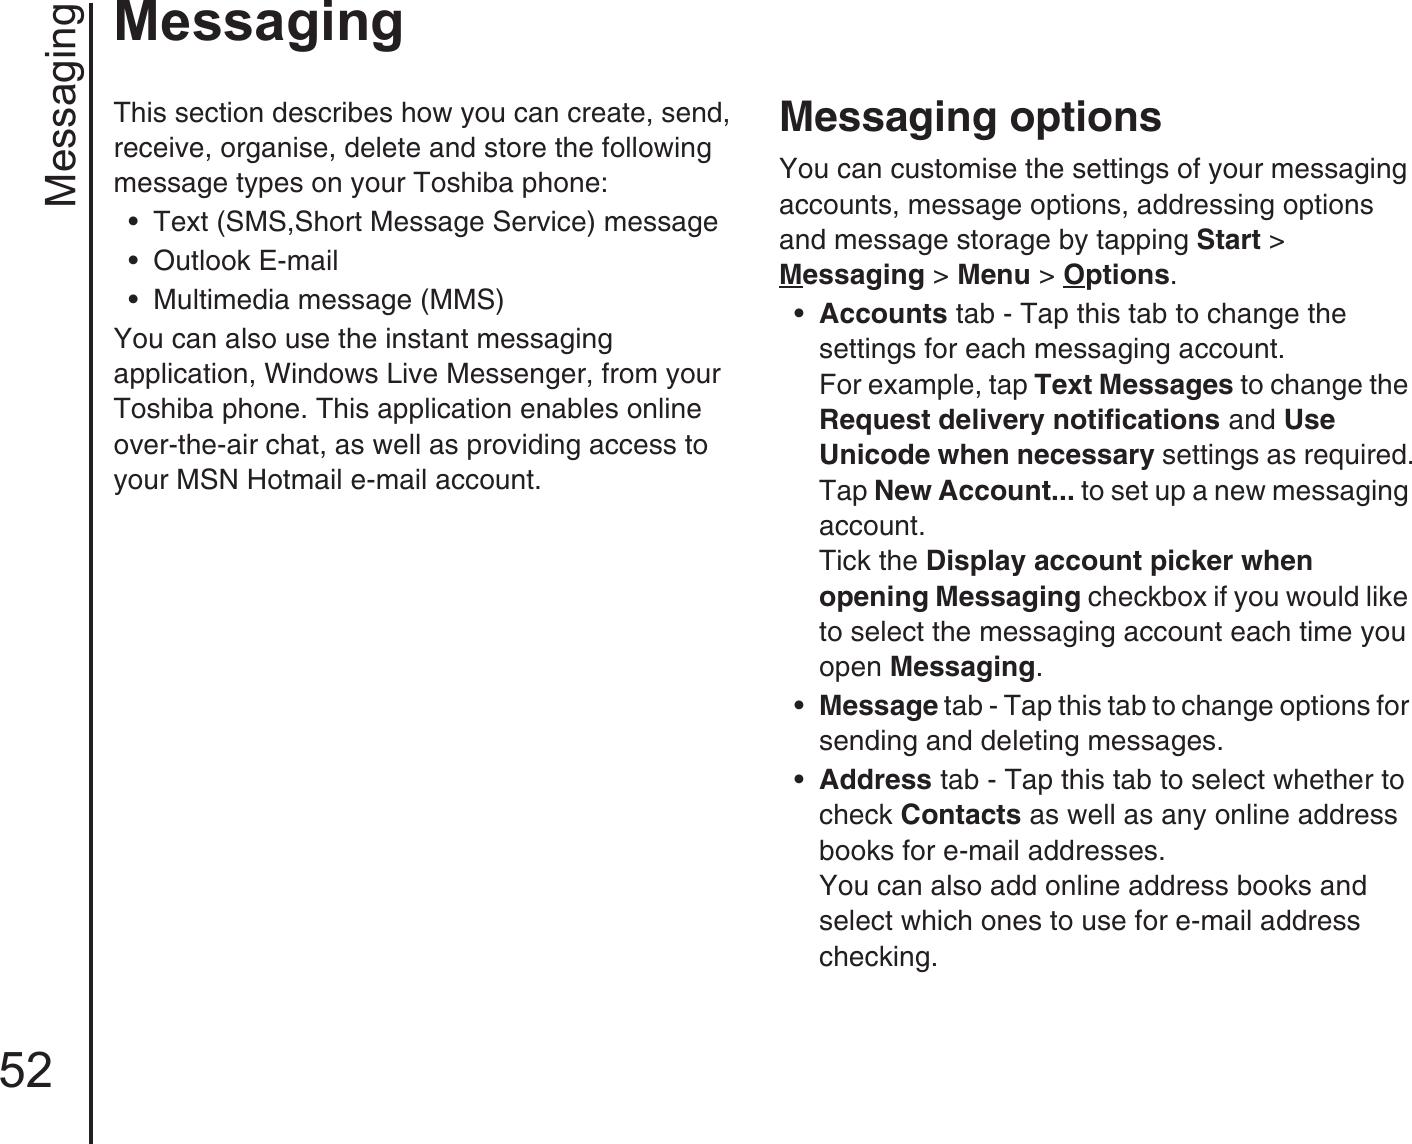 Messaging52MessagingMessagingThis section describes how you can create, send, receive, organise, delete and store the following message types on your Toshiba phone: • Text (SMS,Short Message Service) message• Outlook E-mail • Multimedia message (MMS) You can also use the instant messaging application, Windows Live Messenger, from your Toshiba phone. This application enables online over-the-air chat, as well as providing access to your MSN Hotmail e-mail account.Messaging optionsYou can customise the settings of your messaging accounts, message options, addressing options and message storage by tapping Start &gt; Messaging &gt; Menu &gt; Options.•Accounts tab - Tap this tab to change the settings for each messaging account.For example, tap Text Messages to change the Request delivery notifications and Use Unicode when necessary settings as required.Tap New Account... to set up a new messaging account. Tick the Display account picker when opening Messaging checkbox if you would like to select the messaging account each time you open Messaging.•Message tab - Tap this tab to change options for sending and deleting messages.•Address tab - Tap this tab to select whether to check Contacts as well as any online address books for e-mail addresses.You can also add online address books and select which ones to use for e-mail address checking.